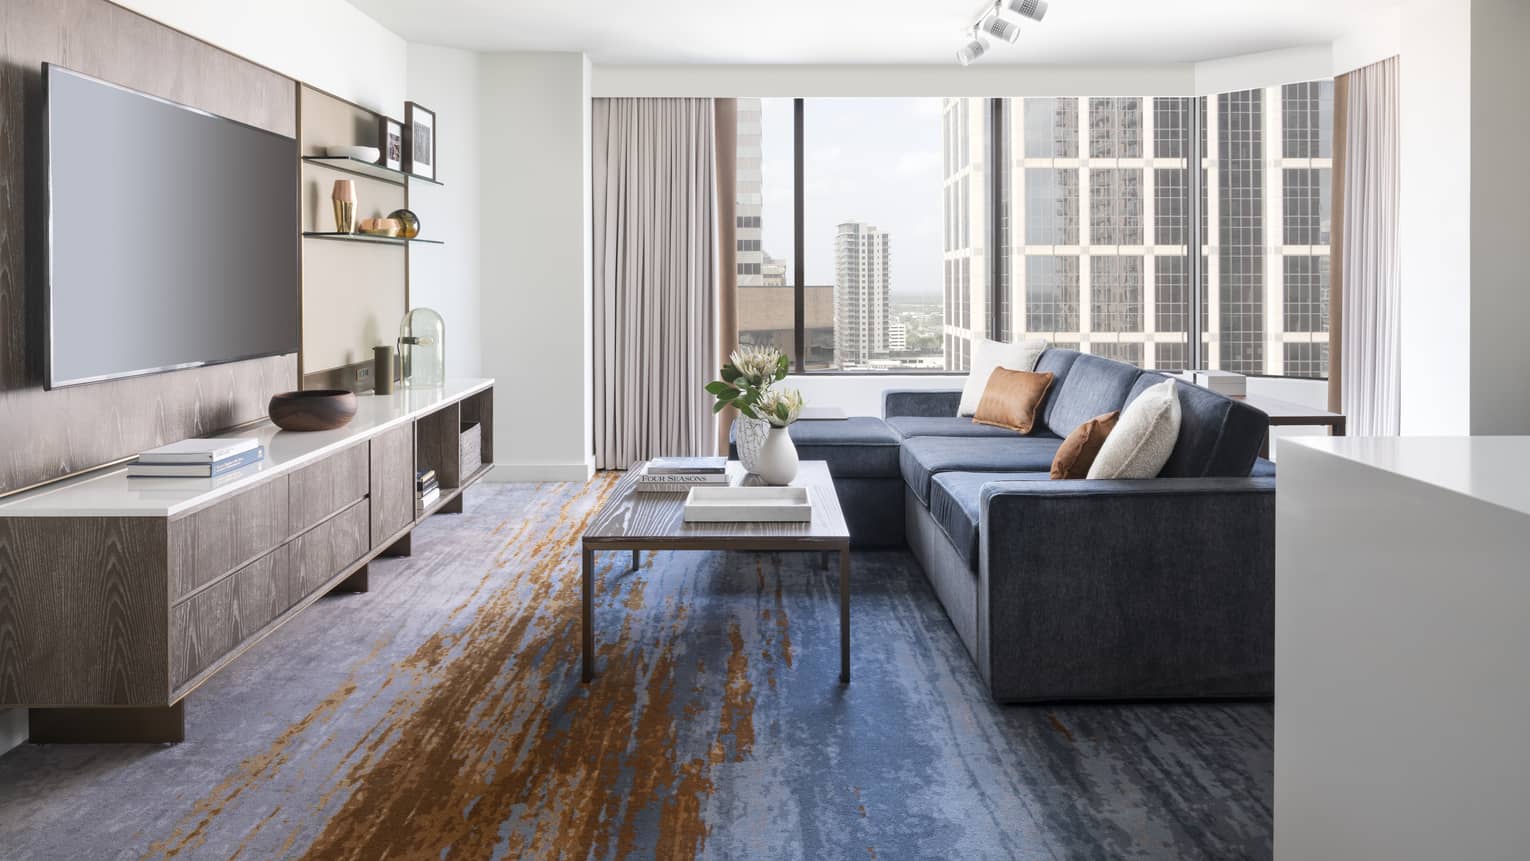 Two-bedroom Residential Suite living area with navy sectional sofa, floor-to-ceiling windows, city views